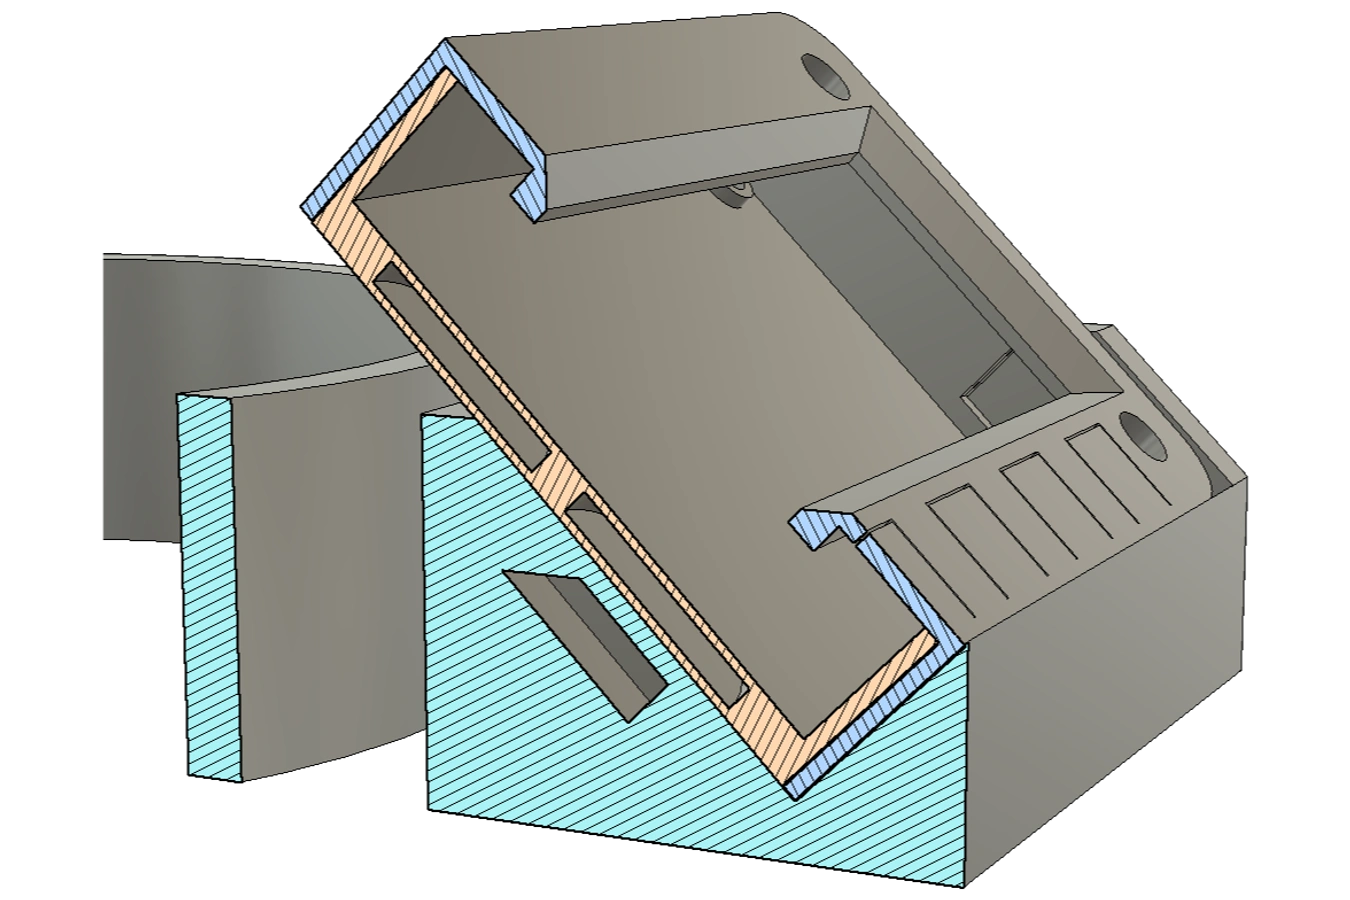 CAD section, showing the locations of the embedded magnets inside the base and the metal discs inside the display case.